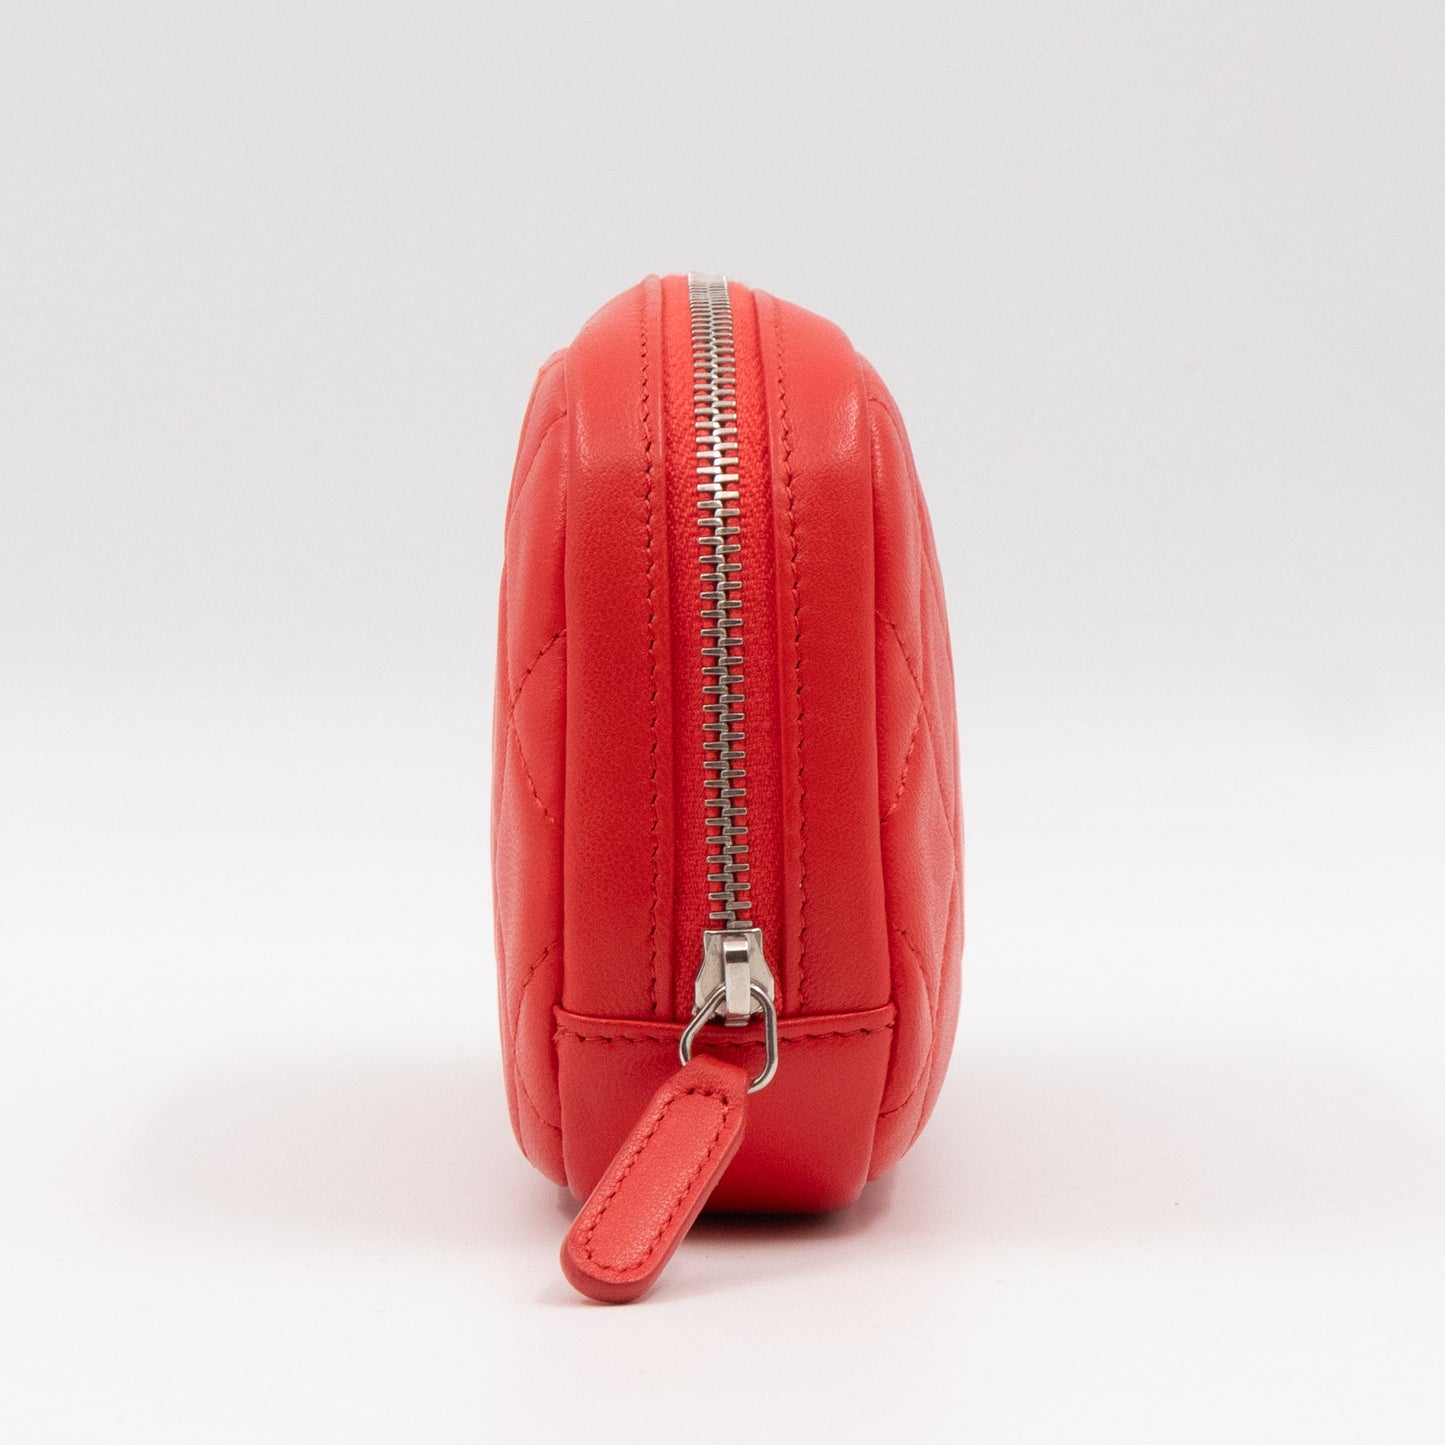 Curvy Pouch Cosmetic Case Coral Leather